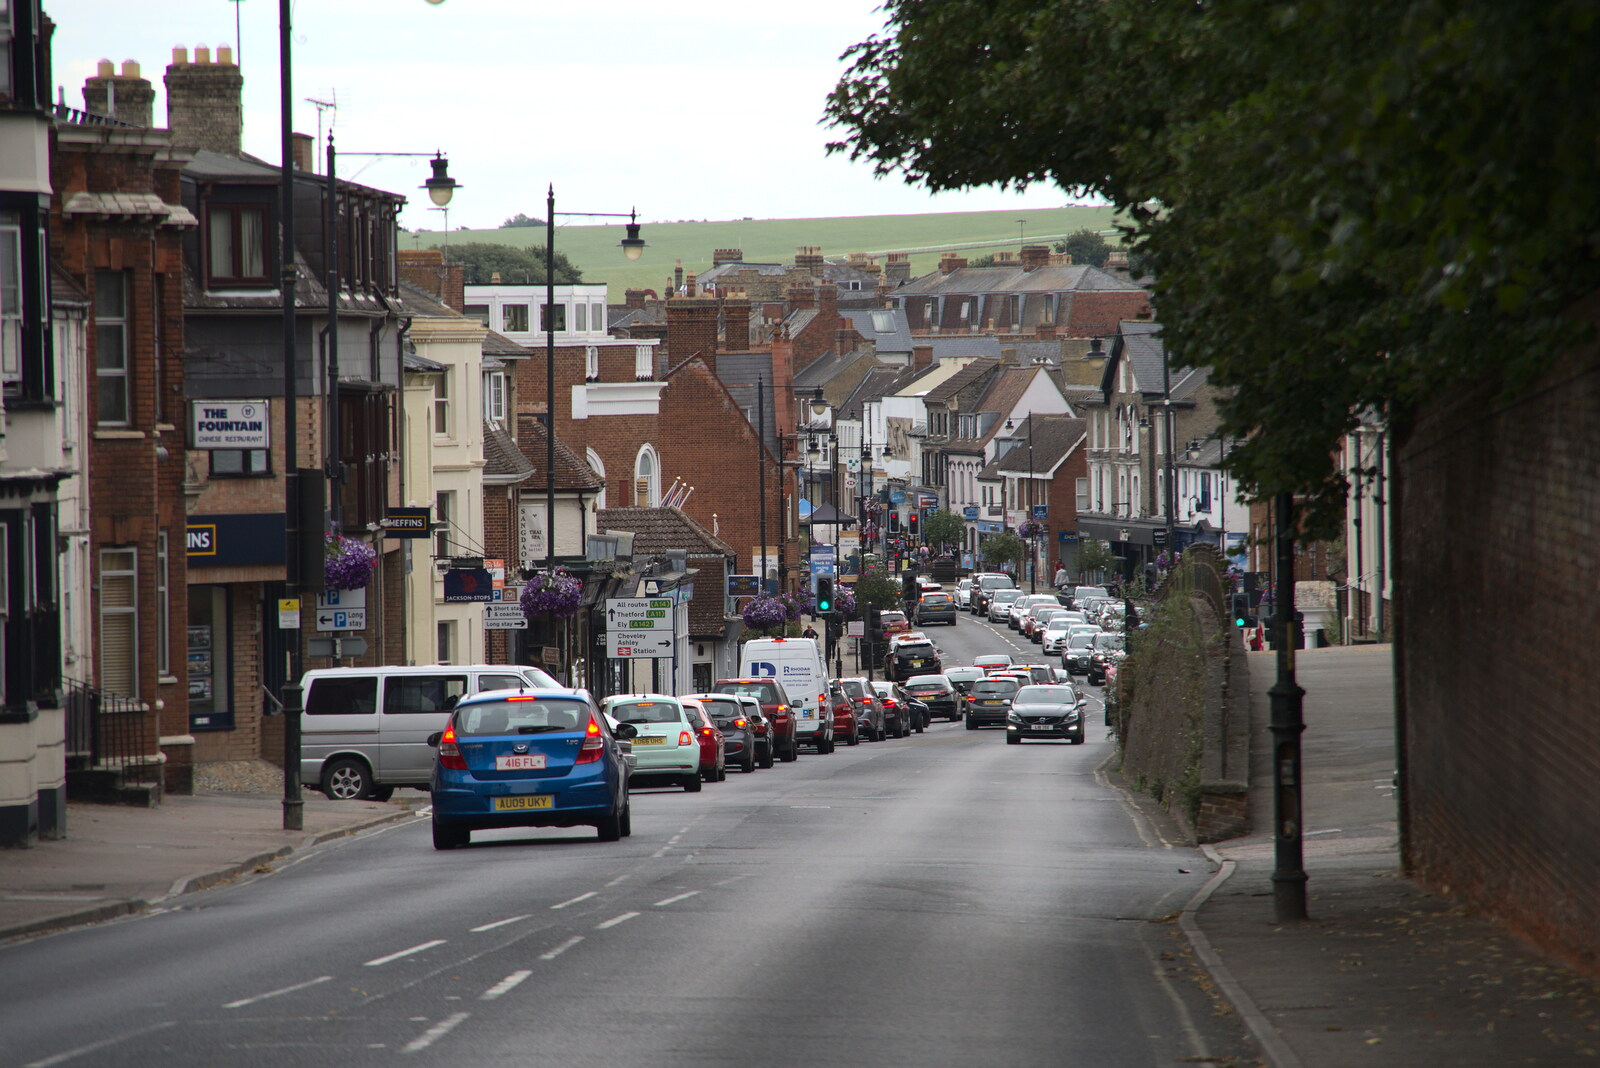 Newmarket High Street from Petay's Wedding Reception, Fanhams Hall, Ware, Hertfordshire - 20th August 2021